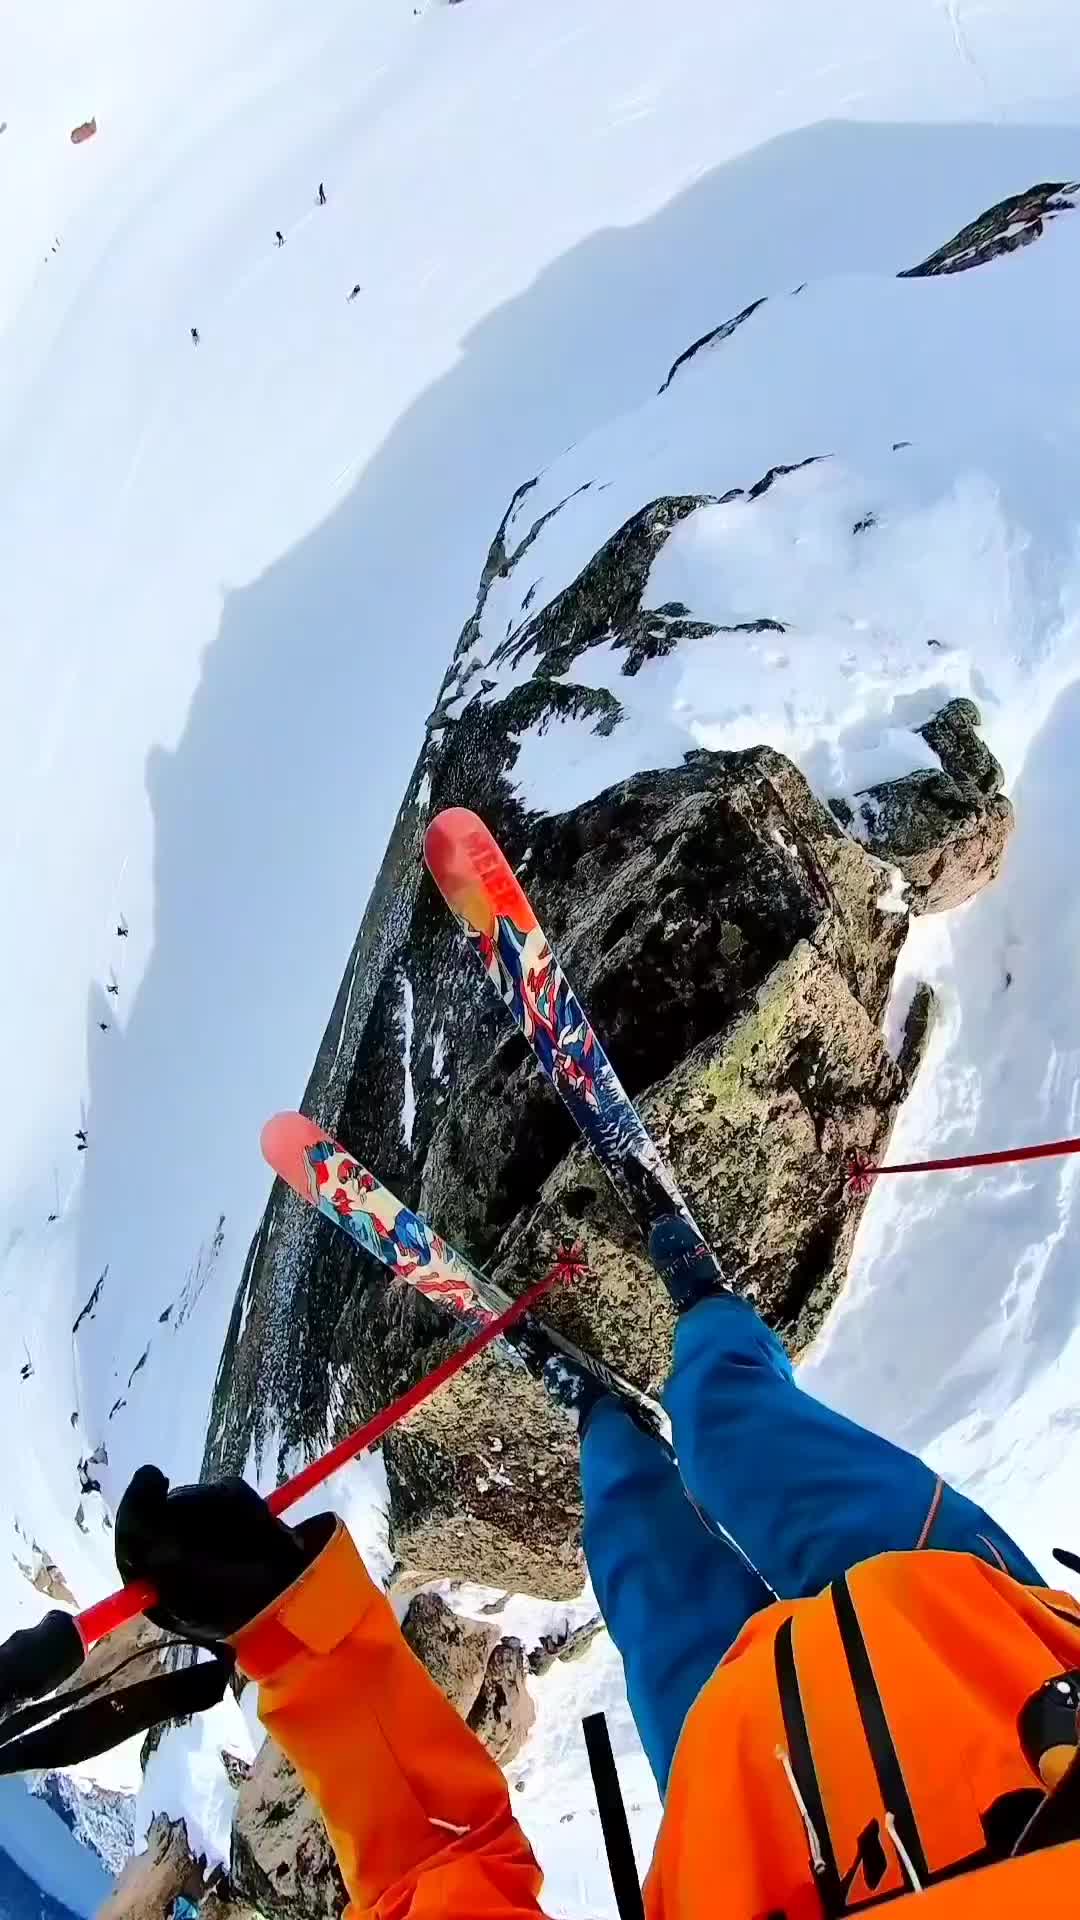 Skiing Down a Cliff in Argentina's Bariloche!